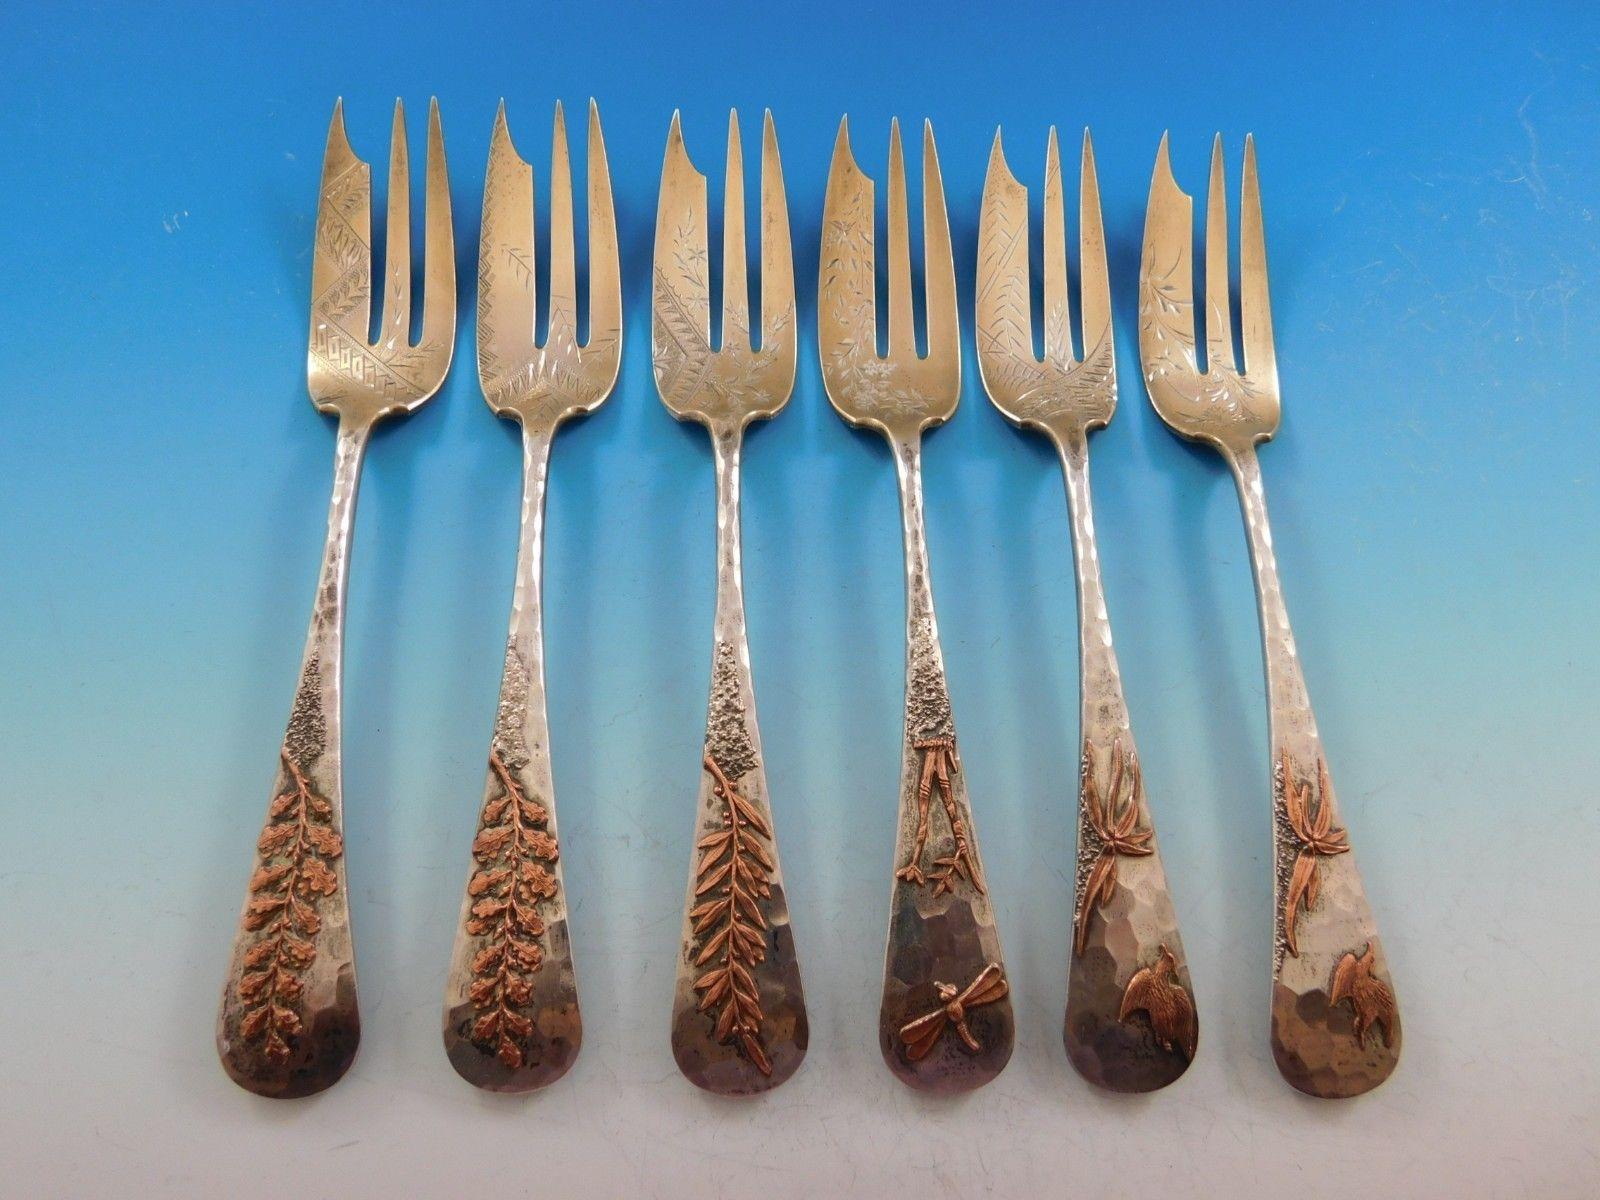 Mixed metals by Gorham

Set of six Gorham aesthetic mixed metals pie forks featuring applied Japanesque mixed metals elements. Bright cut geometric and foliate designs are found throughout the tines of the forks. The hand hammered handles feature